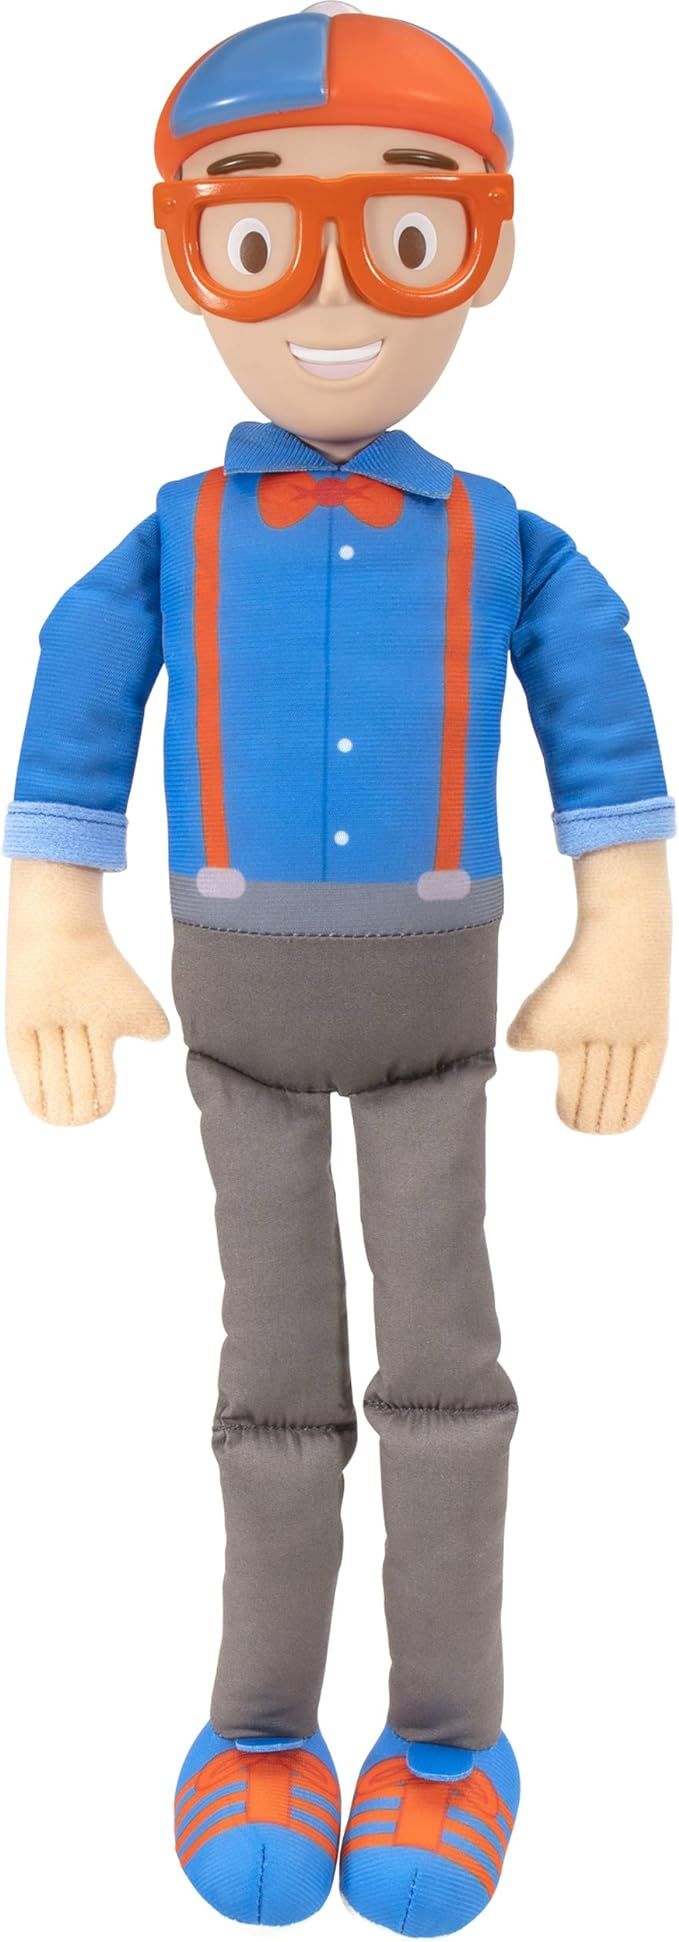 Blippi Bendable Plush Doll, 16” Tall Featuring SFX - Squeeze The Belly to Hear Classic catchphr... | Amazon (US)